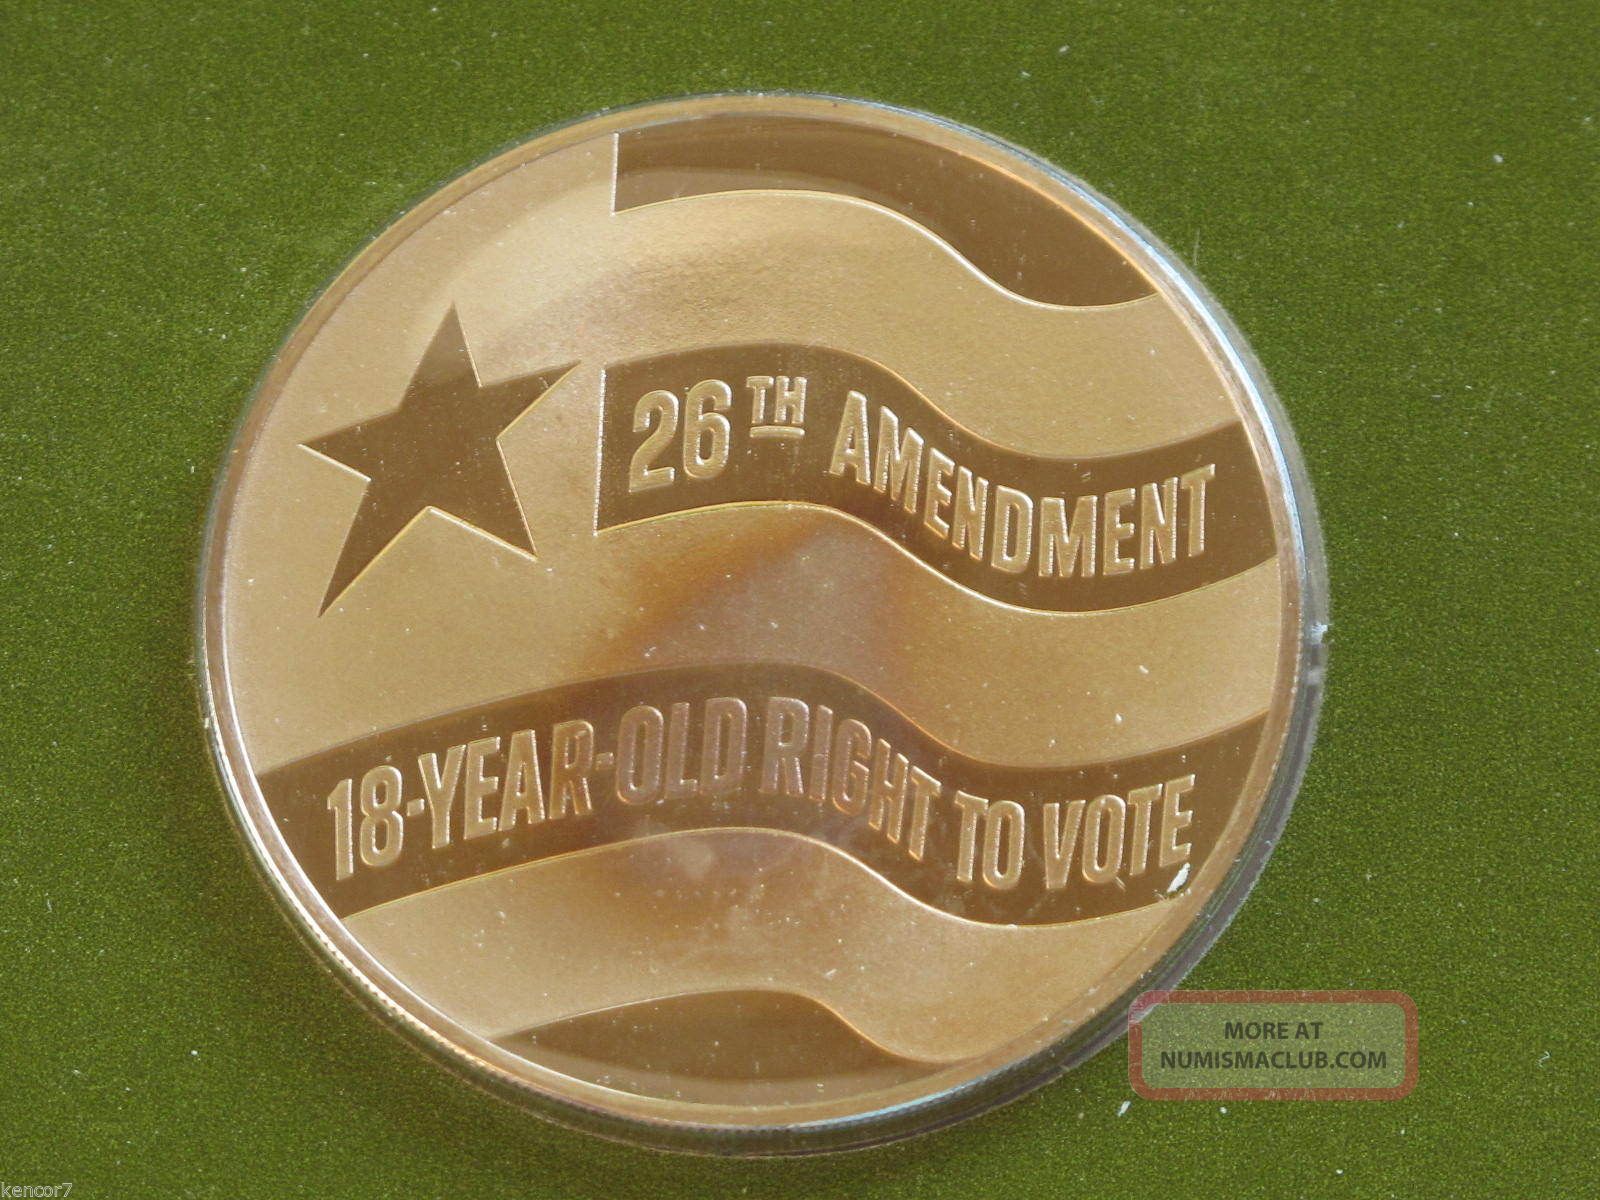 Voters National Committee 26th Amendment Solid Bronze ...
